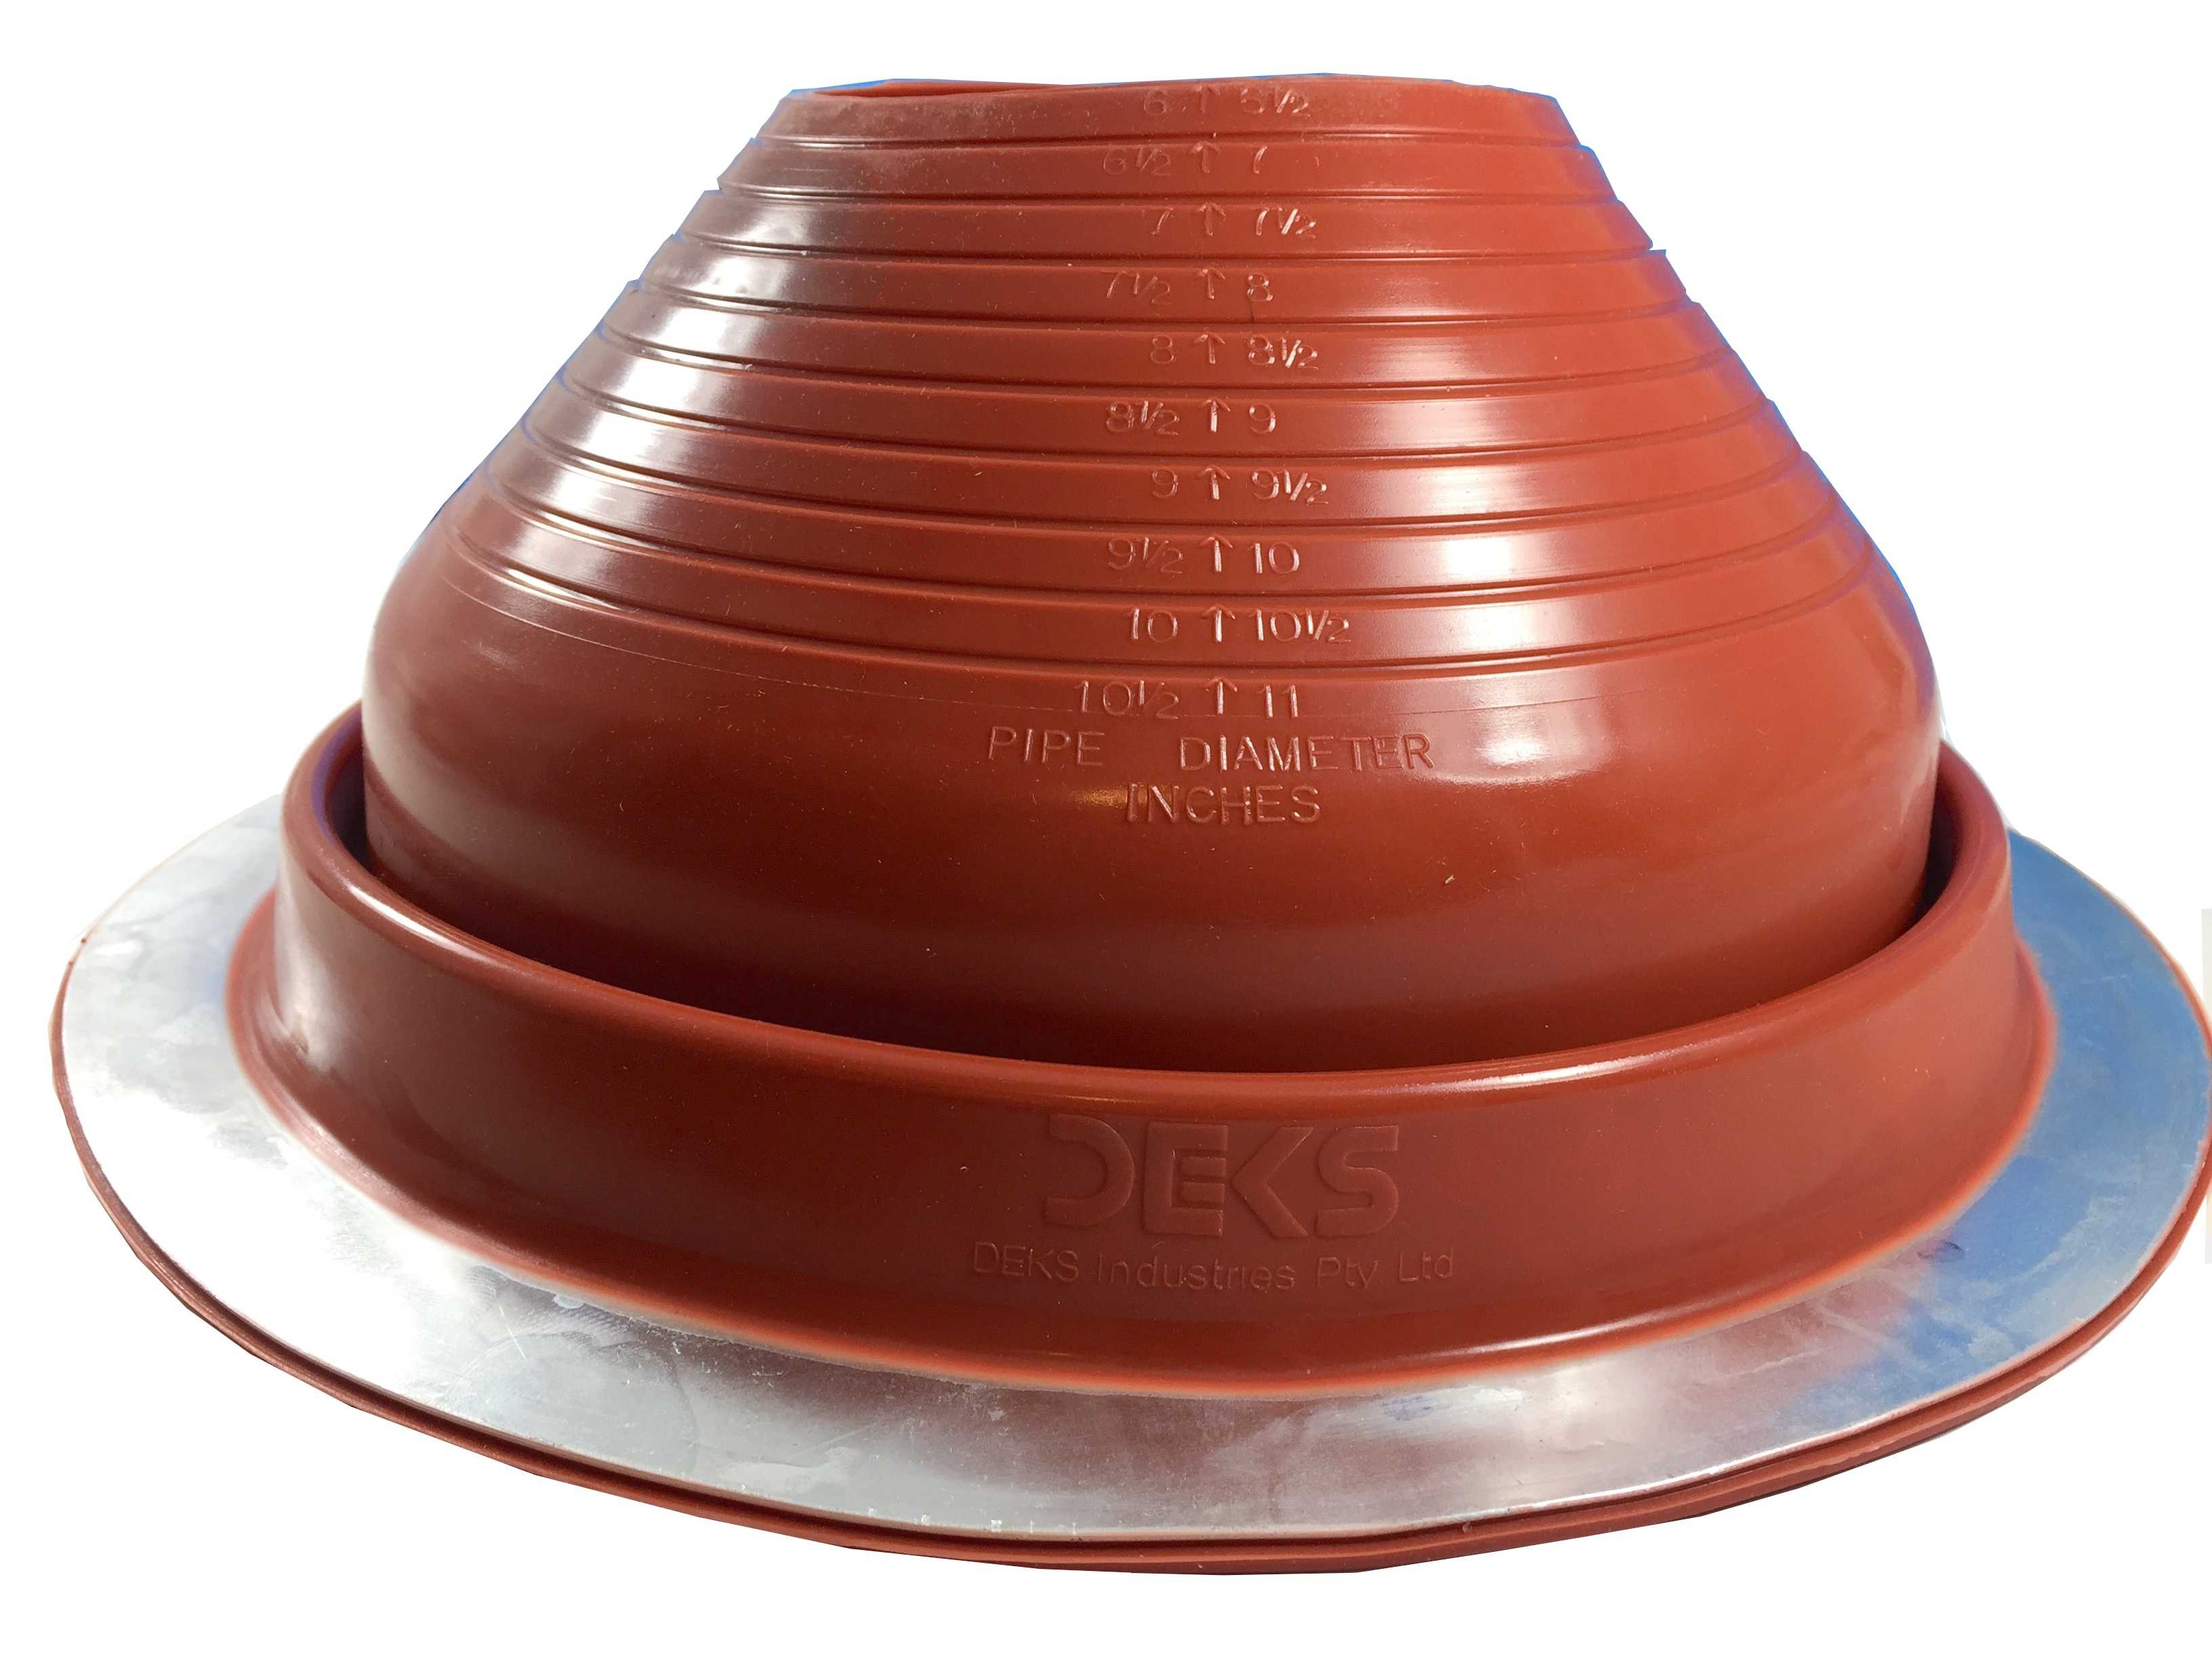 DEKTITE ROUND BASE METAL ROOFING PIPE FLASHING BOOT: #7 RED High Temp Silicone Flexible Pipe Flashing Dektite (for OD pipe sizes 6' - 11') - Metal Roof Jack Pipe Boot - Metal Roofing Pipe Flashing